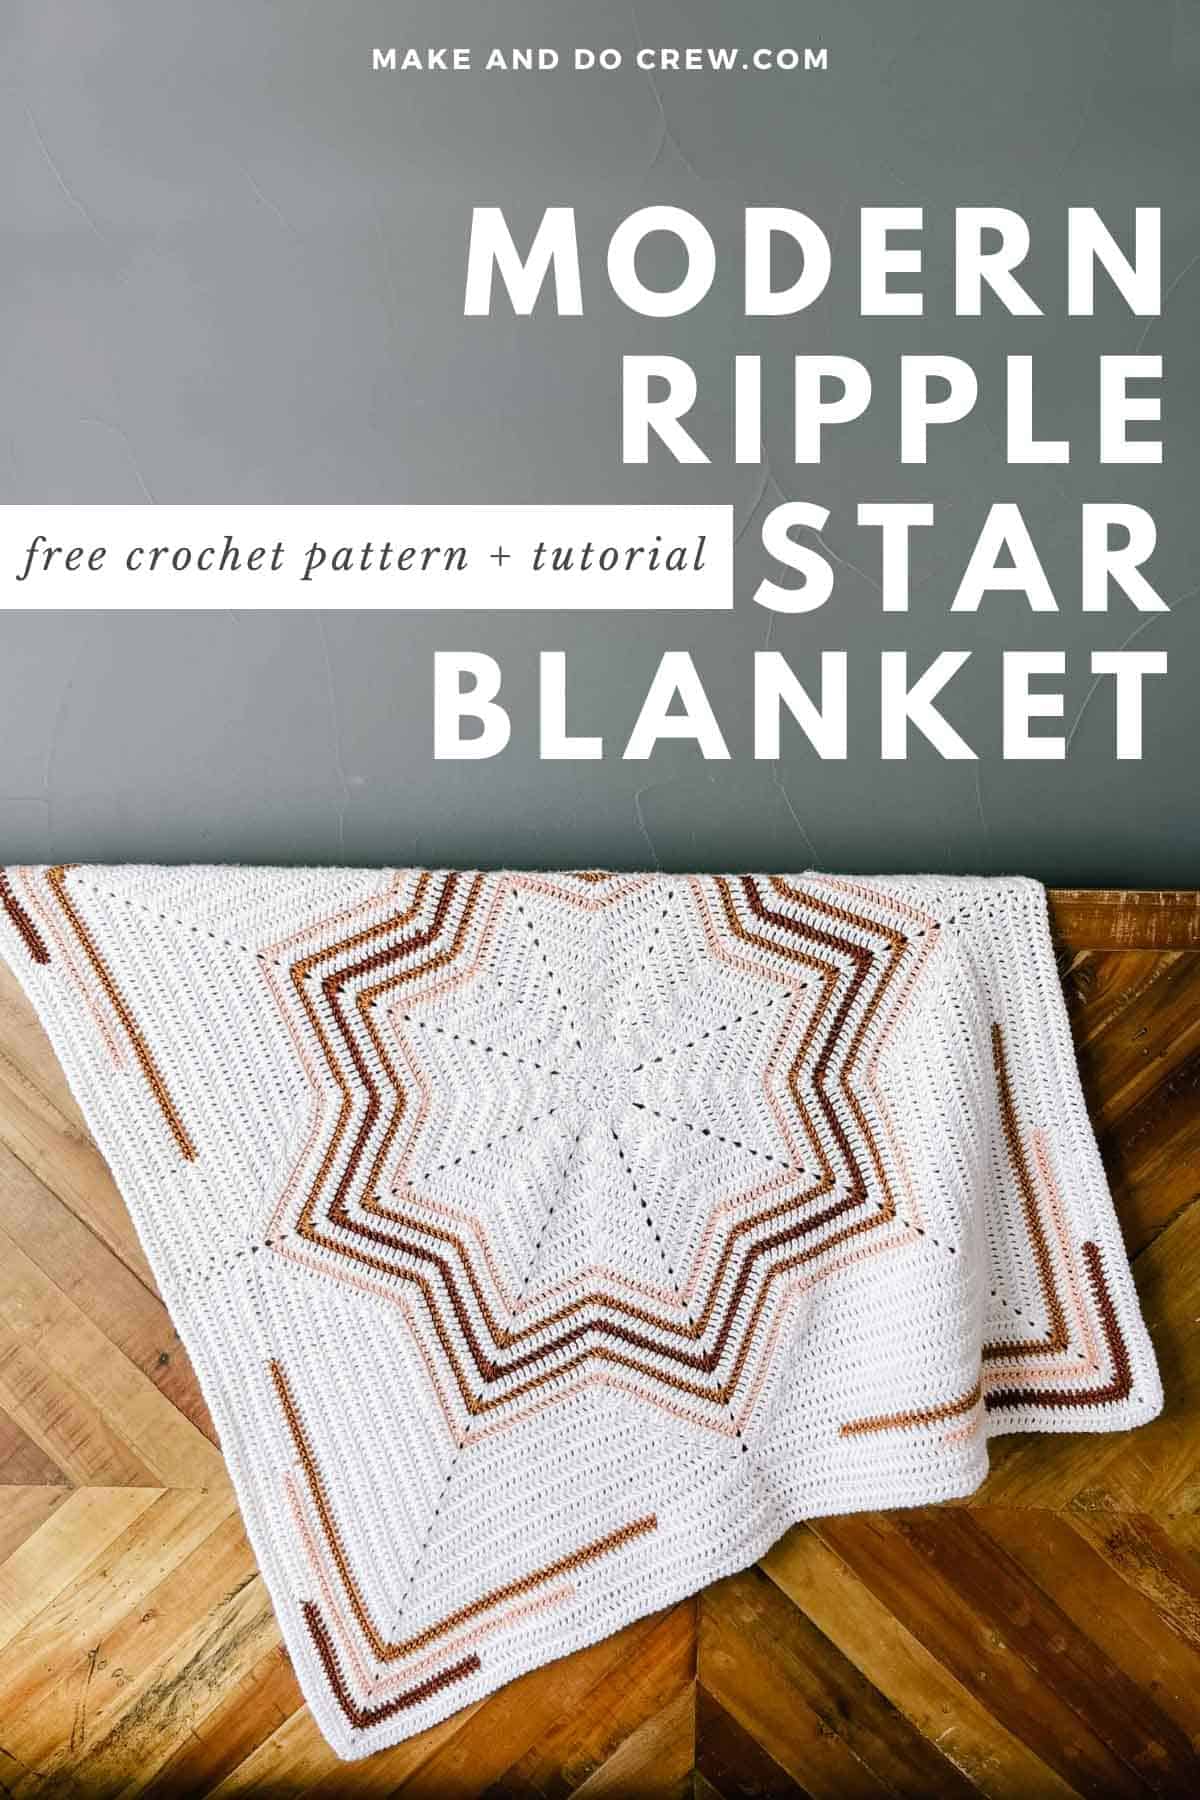 This image says "Modern Ripple Star Blanket." It shows a colorful 8 point star on a white background free crochet blanket pattern.